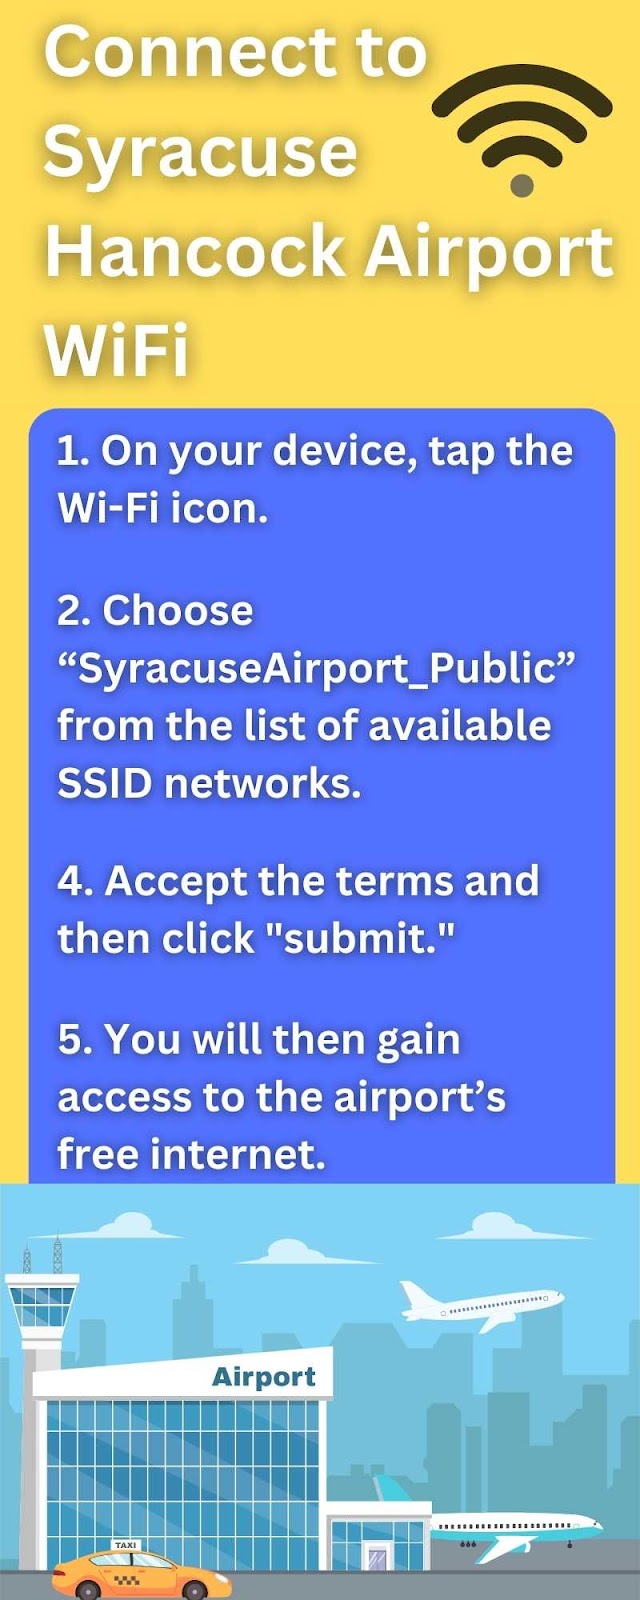 Connect to WiFi To SYR WIFI